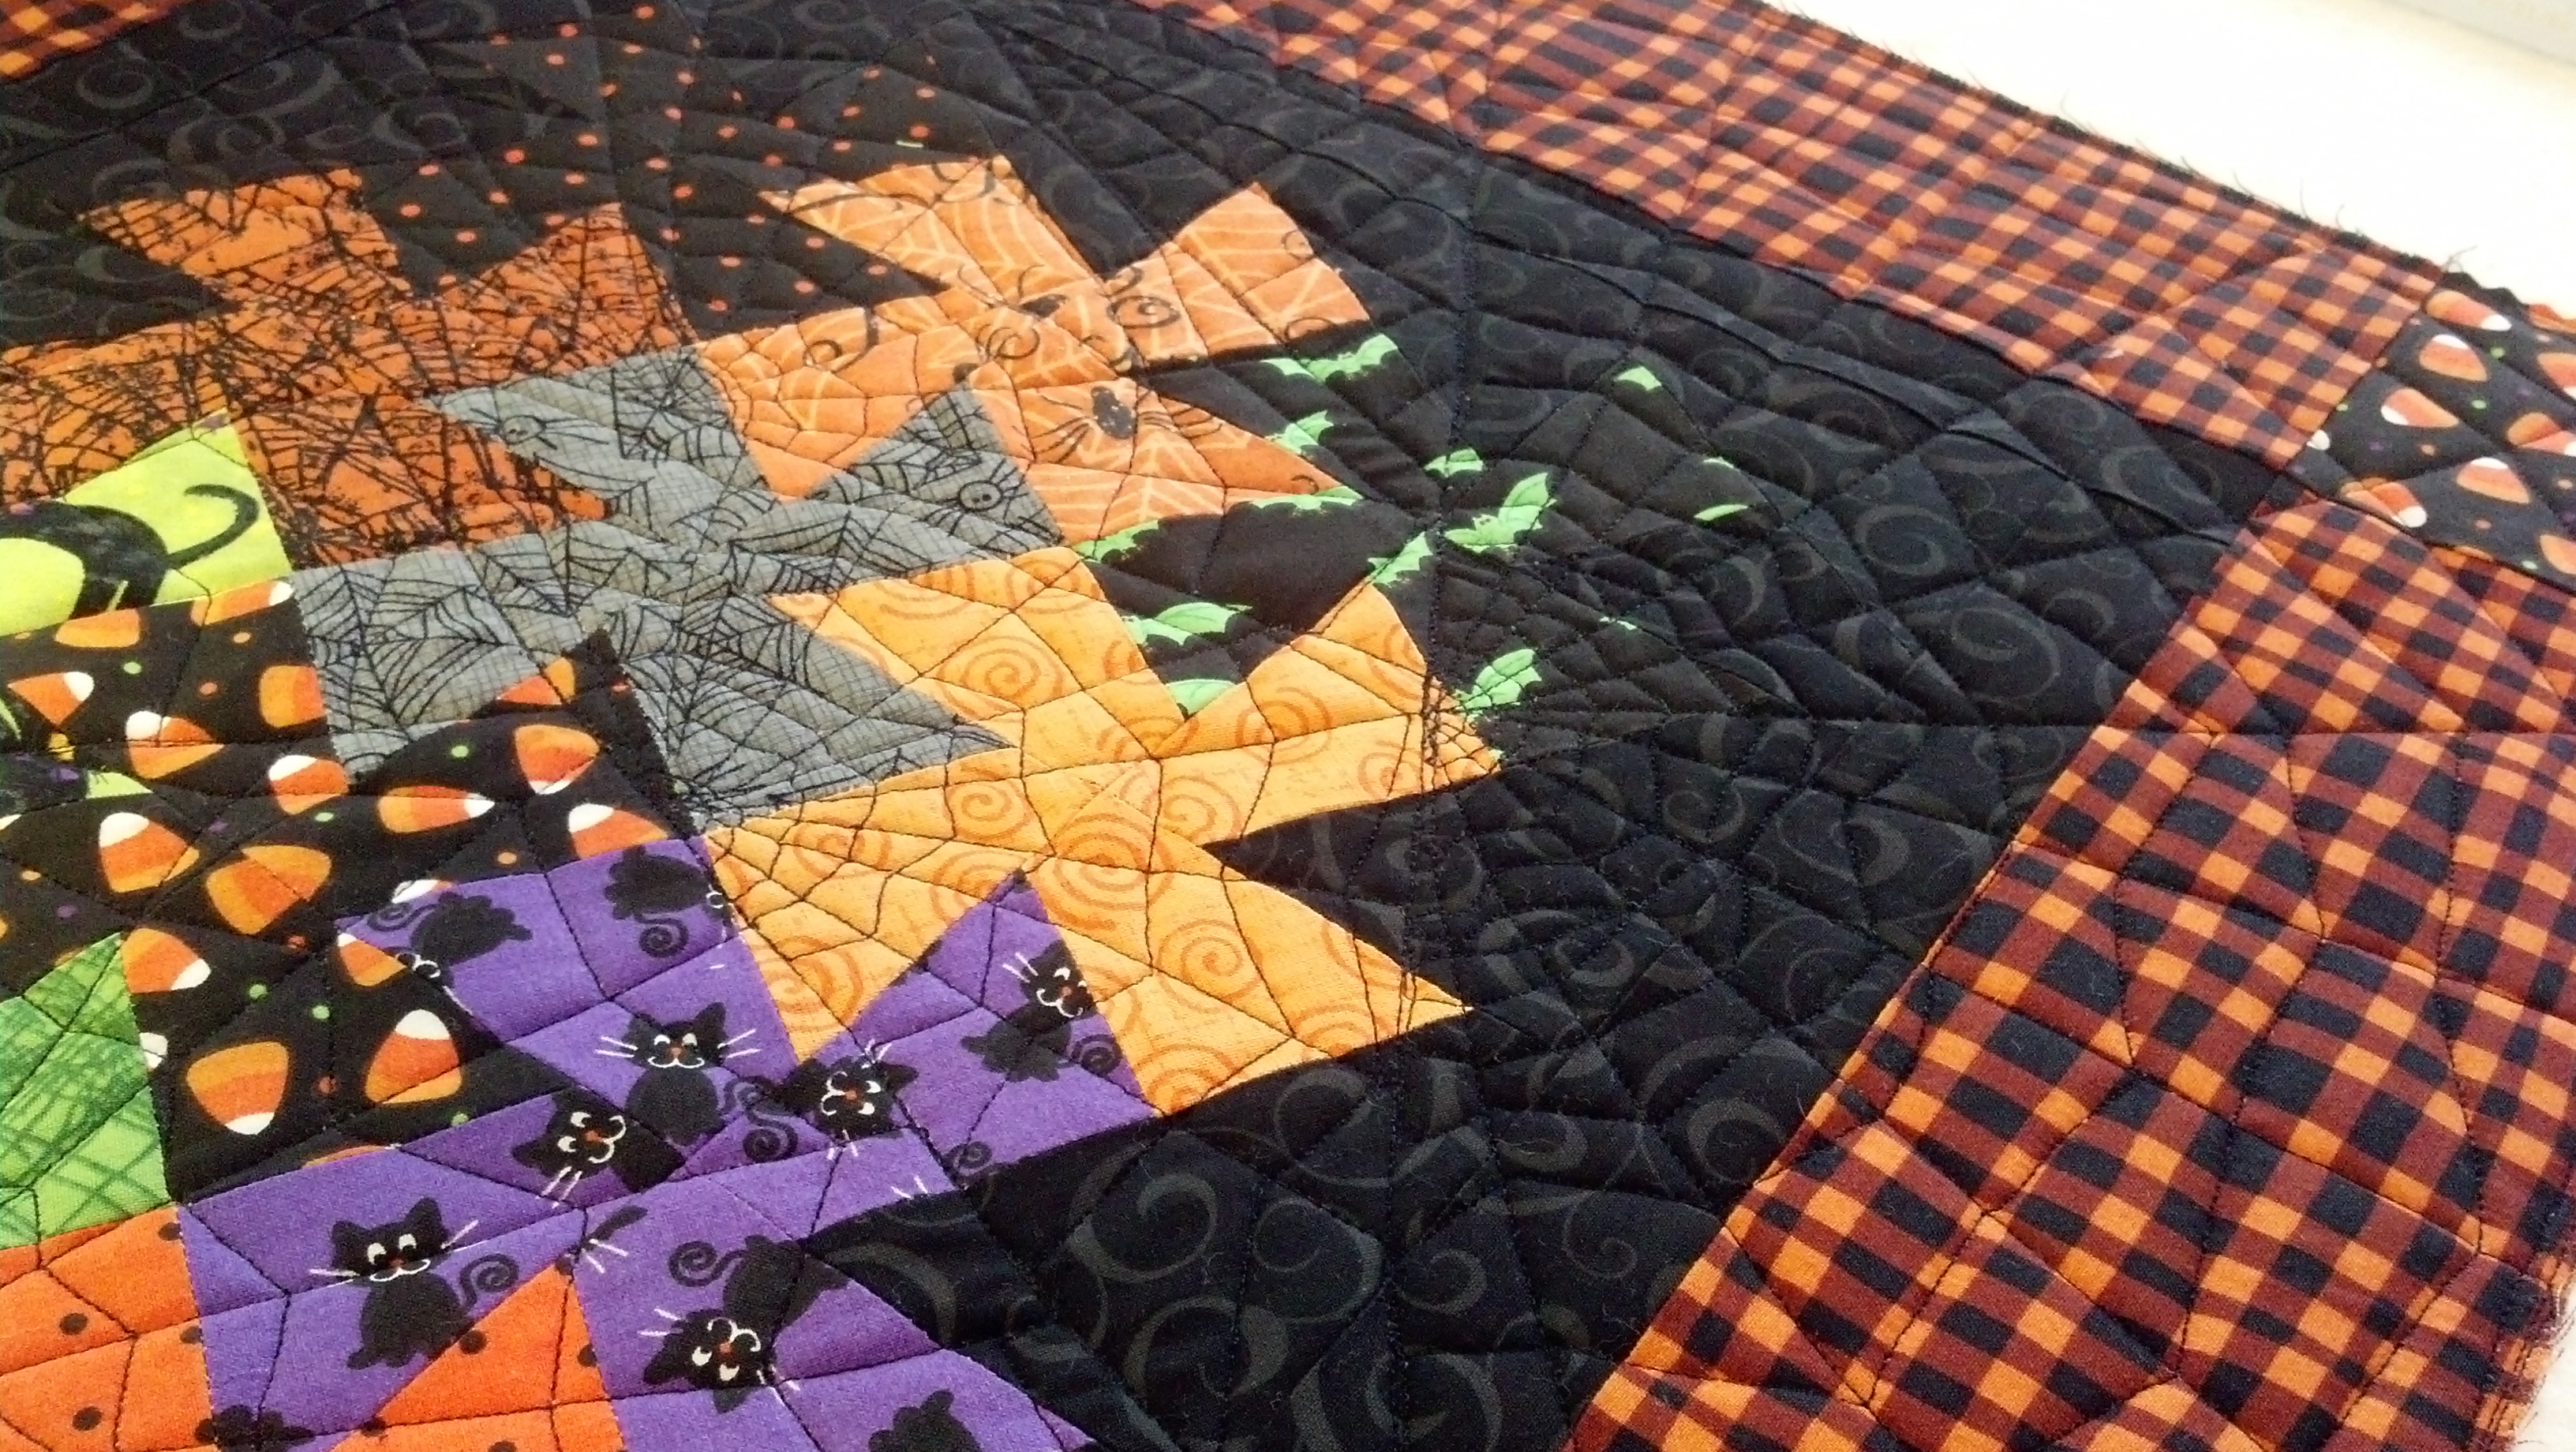 Custom quilting by Maria Denise Hall